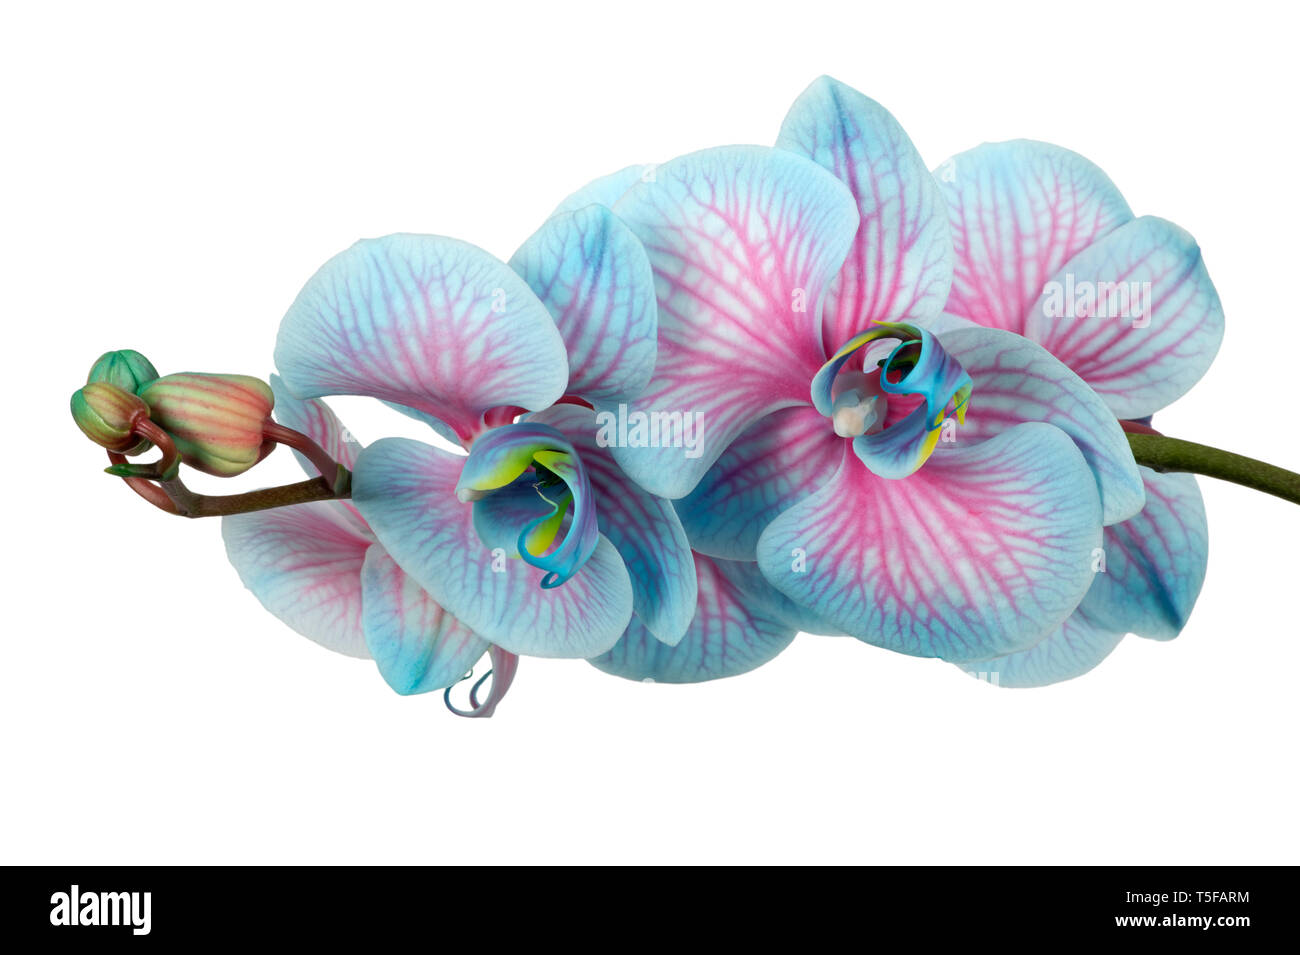 Pink & blue Phalaenopsis Orchid Foto Stock